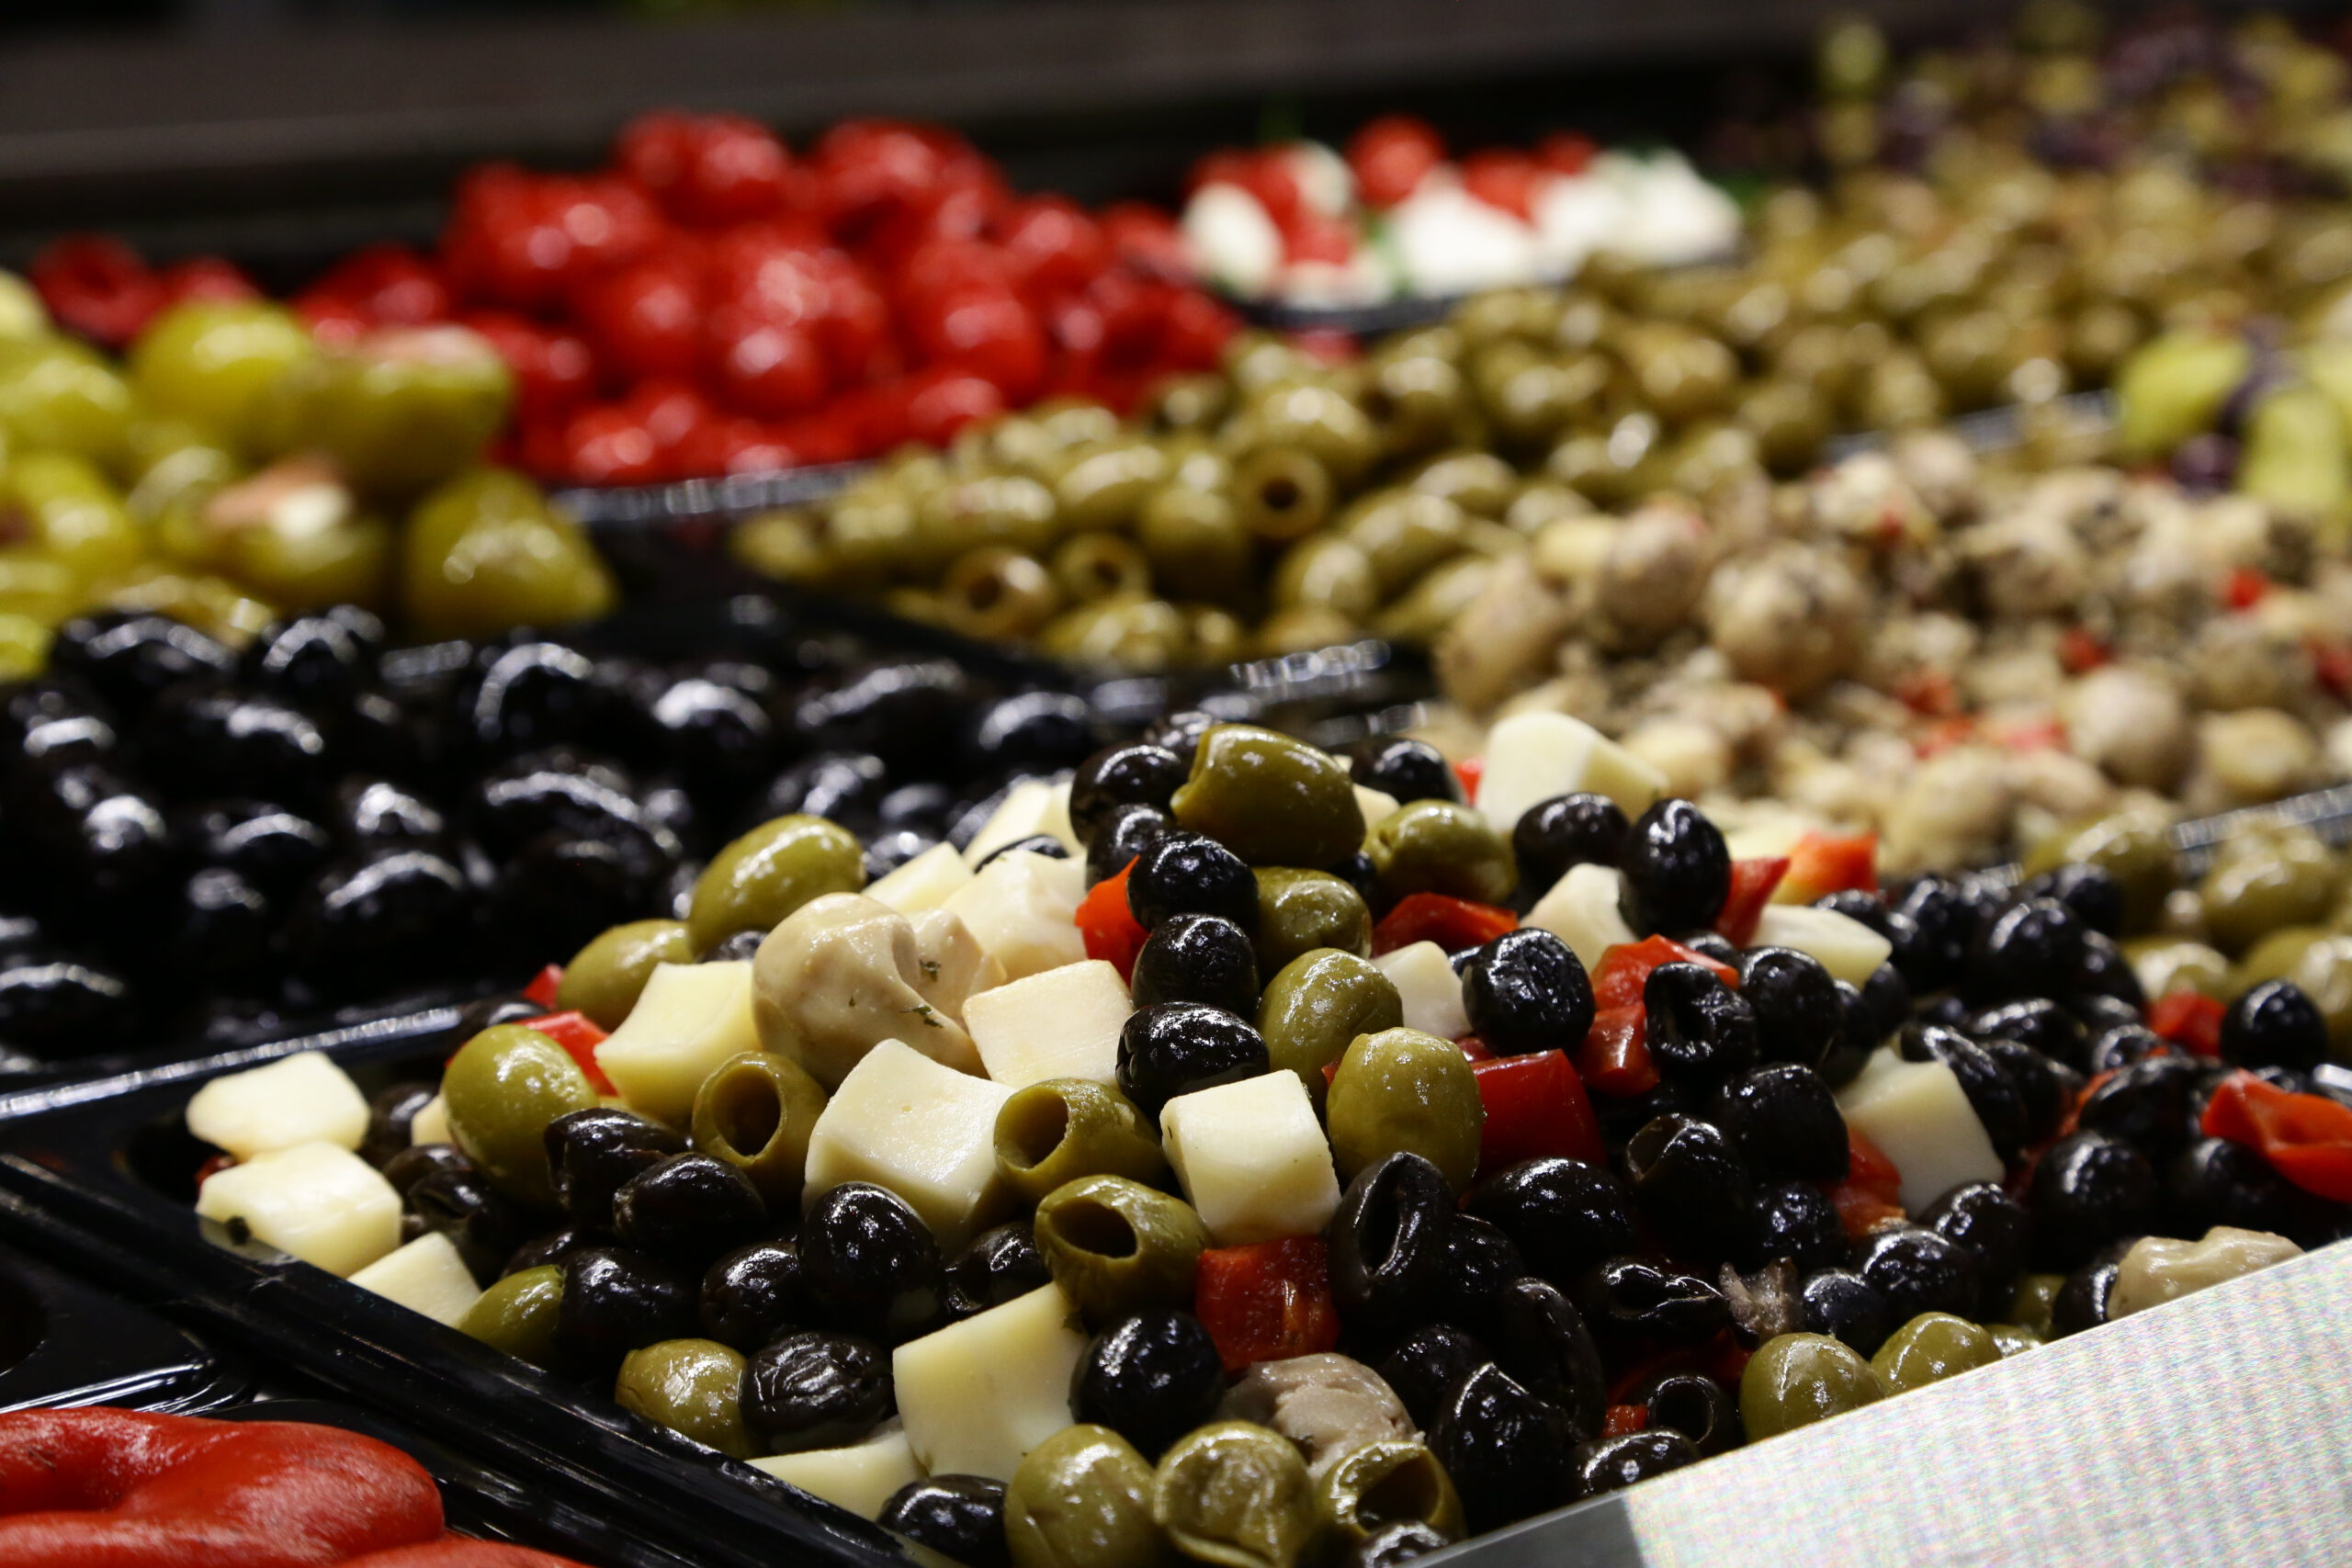 Olives are just a small taste of the treats on tap at the 2016 Summer Fancy Food Show